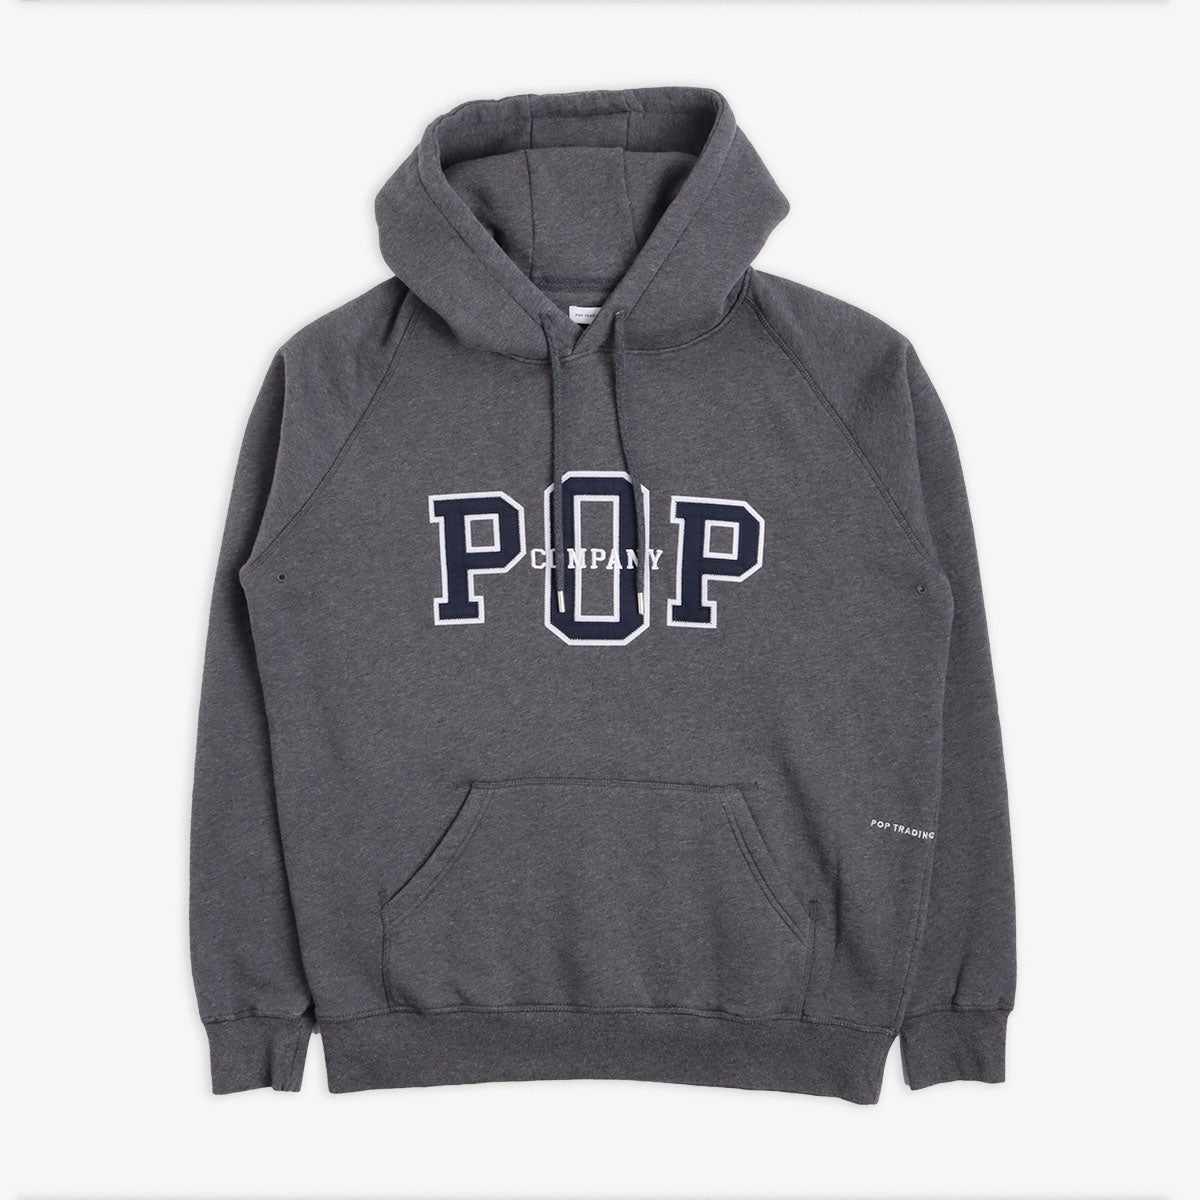 Pop Trading Company Hoodie, Charcoal Heather, Detail Shot 5